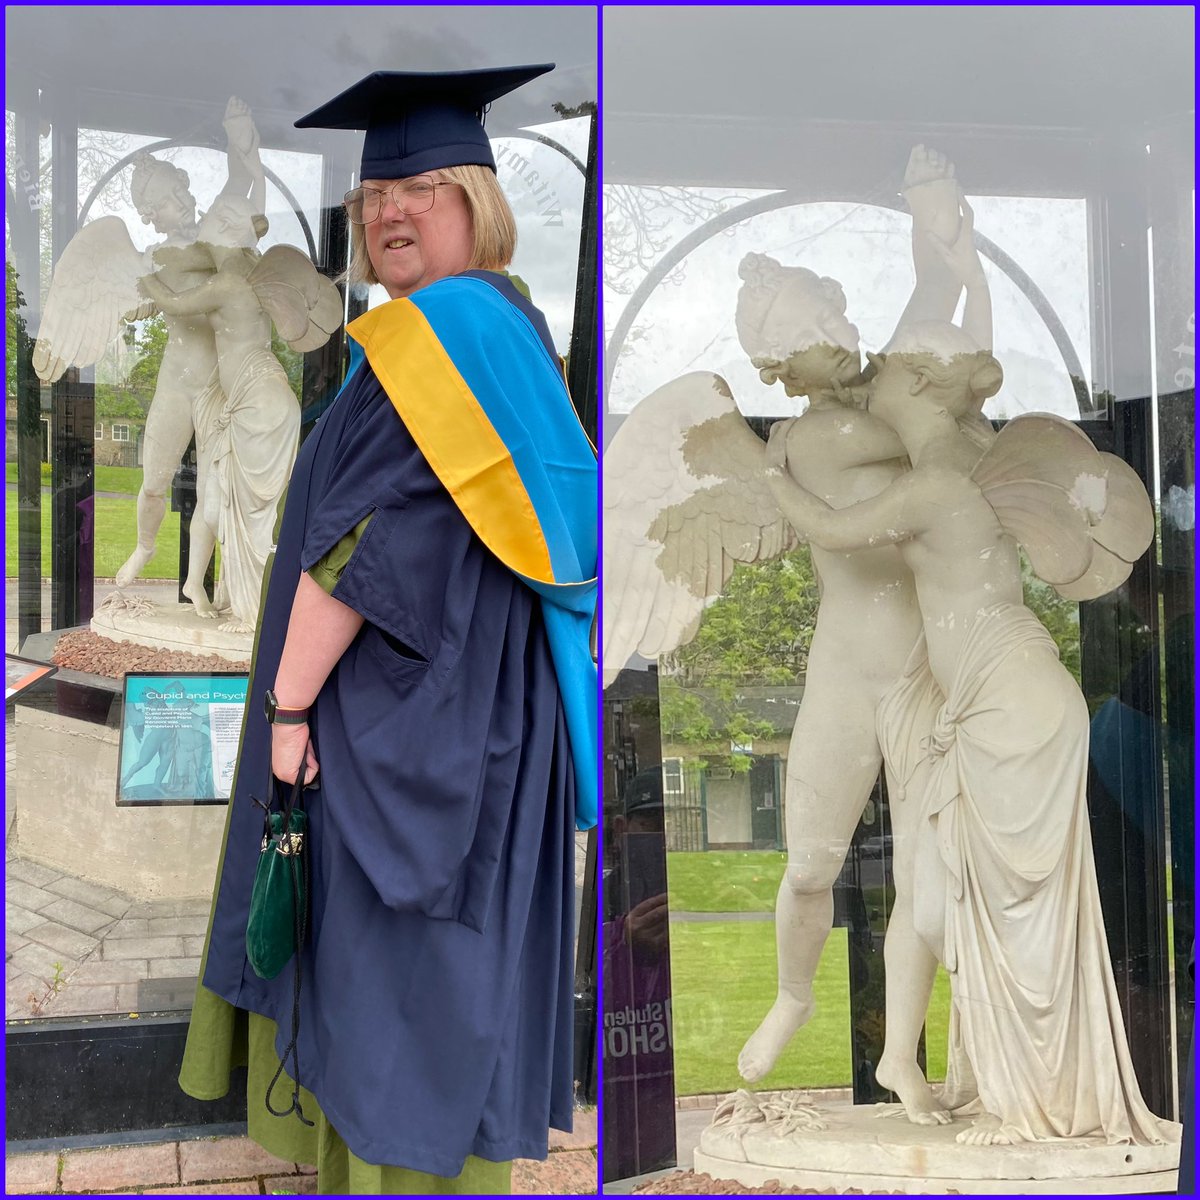 #ClassicsTober Day 10 Psyche. my Graduation Ceremony for my Classics BA Degree was in Harrogate in May. In Crescent Gardens there is statue of Cupid and Psyche - photos HAD to be taken! 😆 sorry about the poor quality photos the statue was enclosed in glass